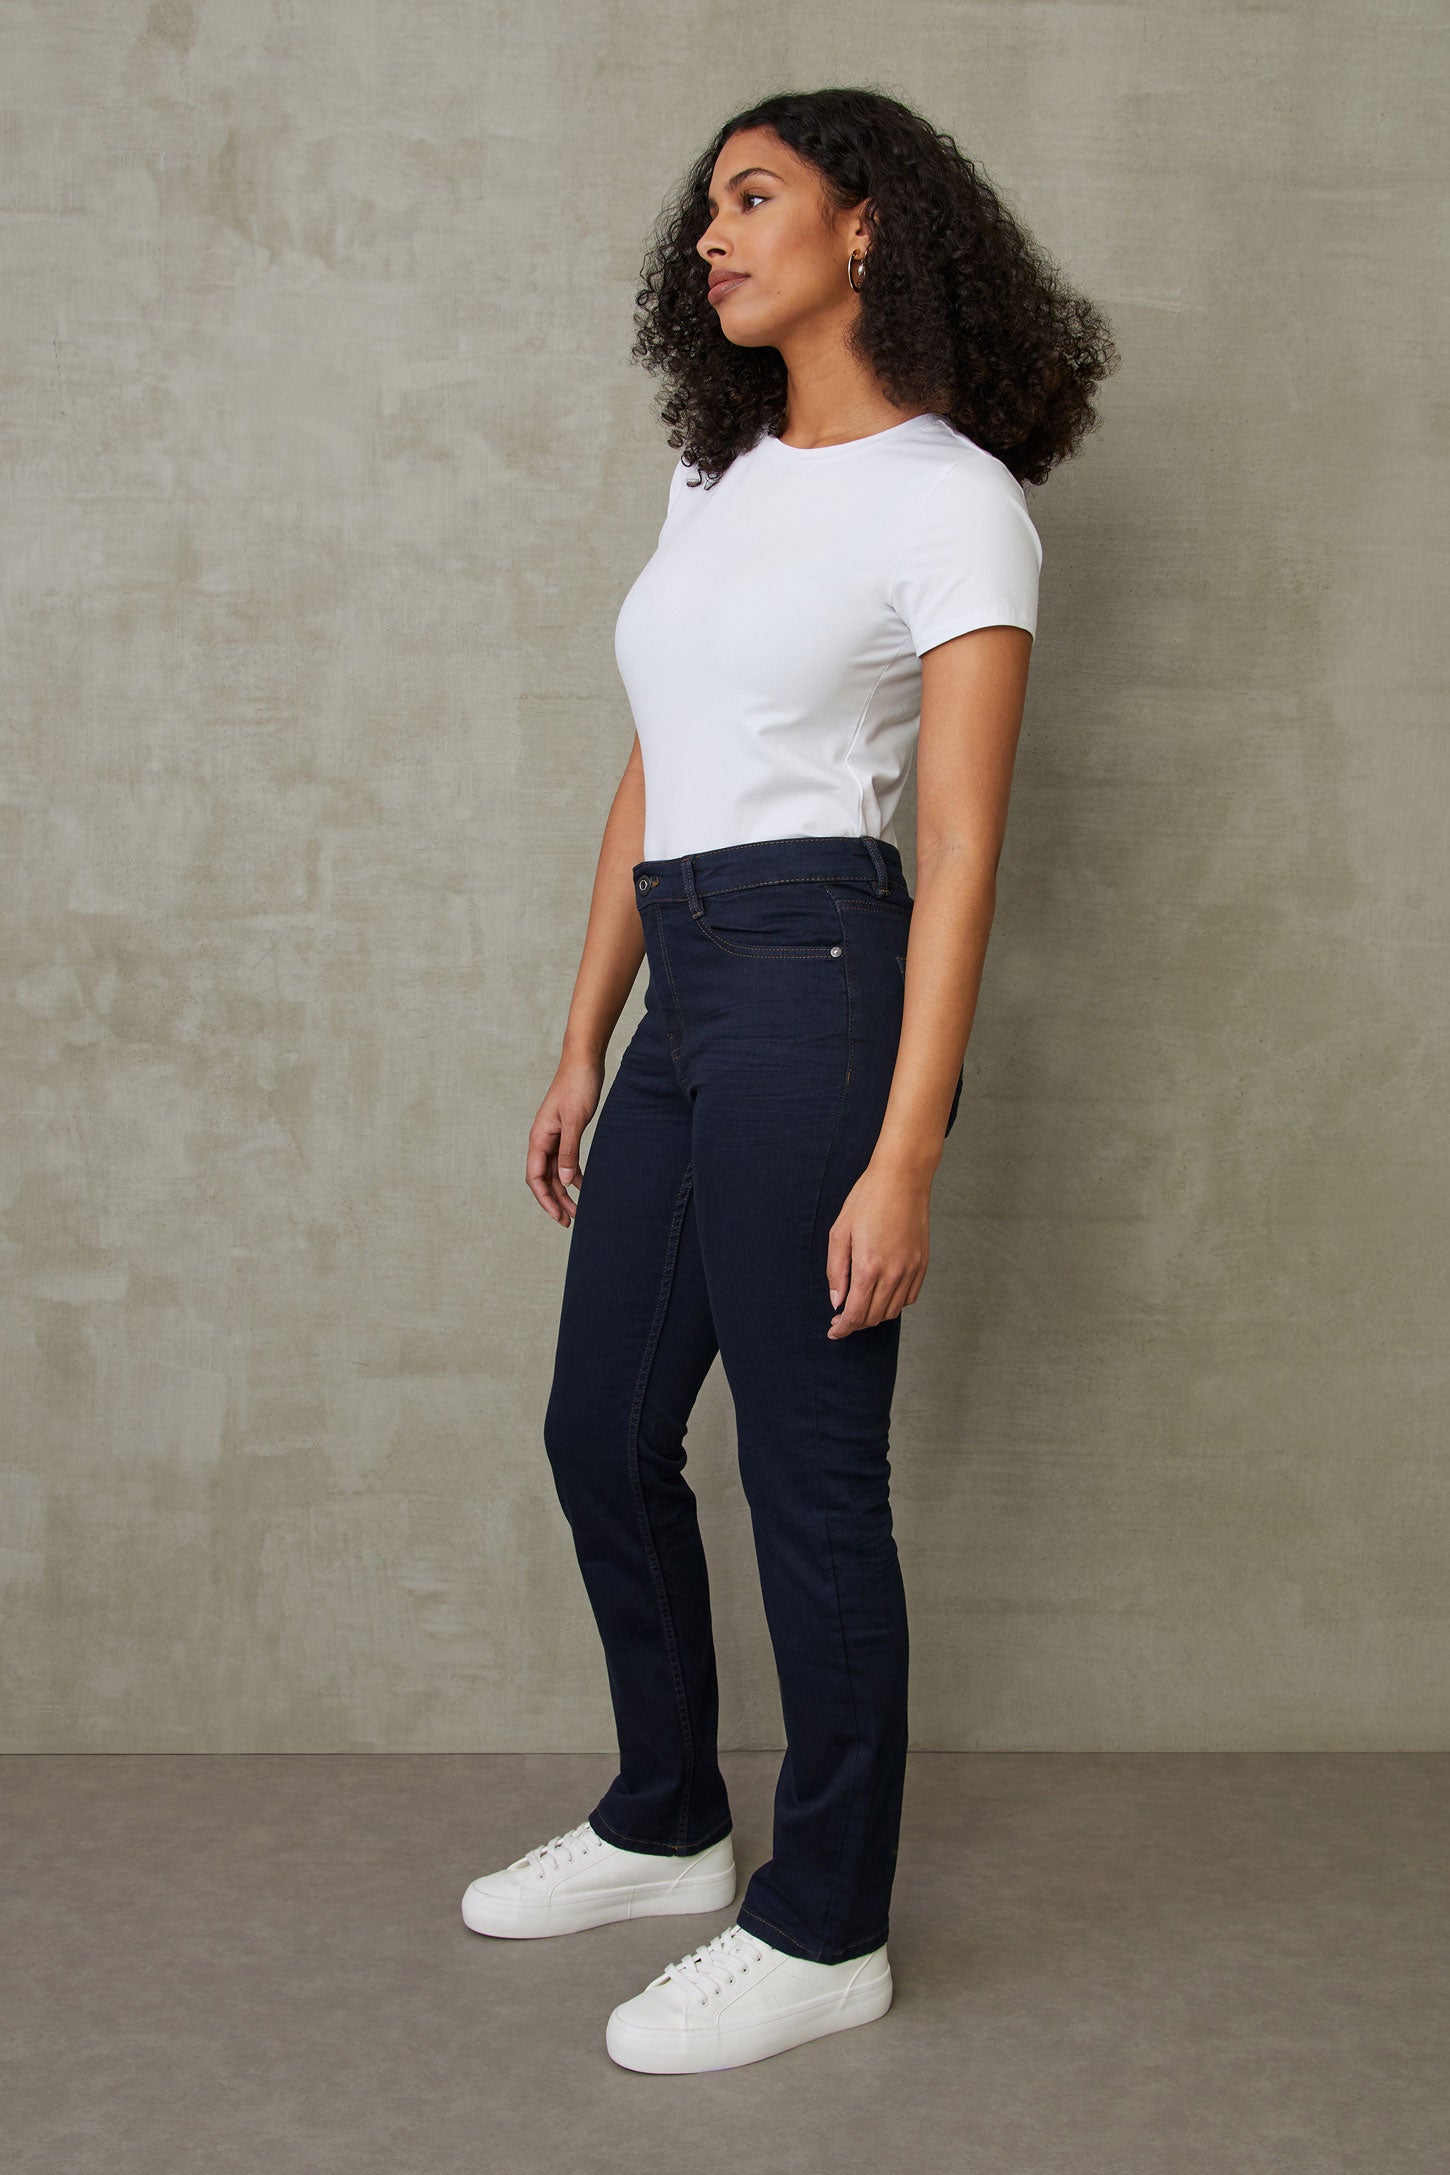 Jeans jambe droite - Femme && RINSE